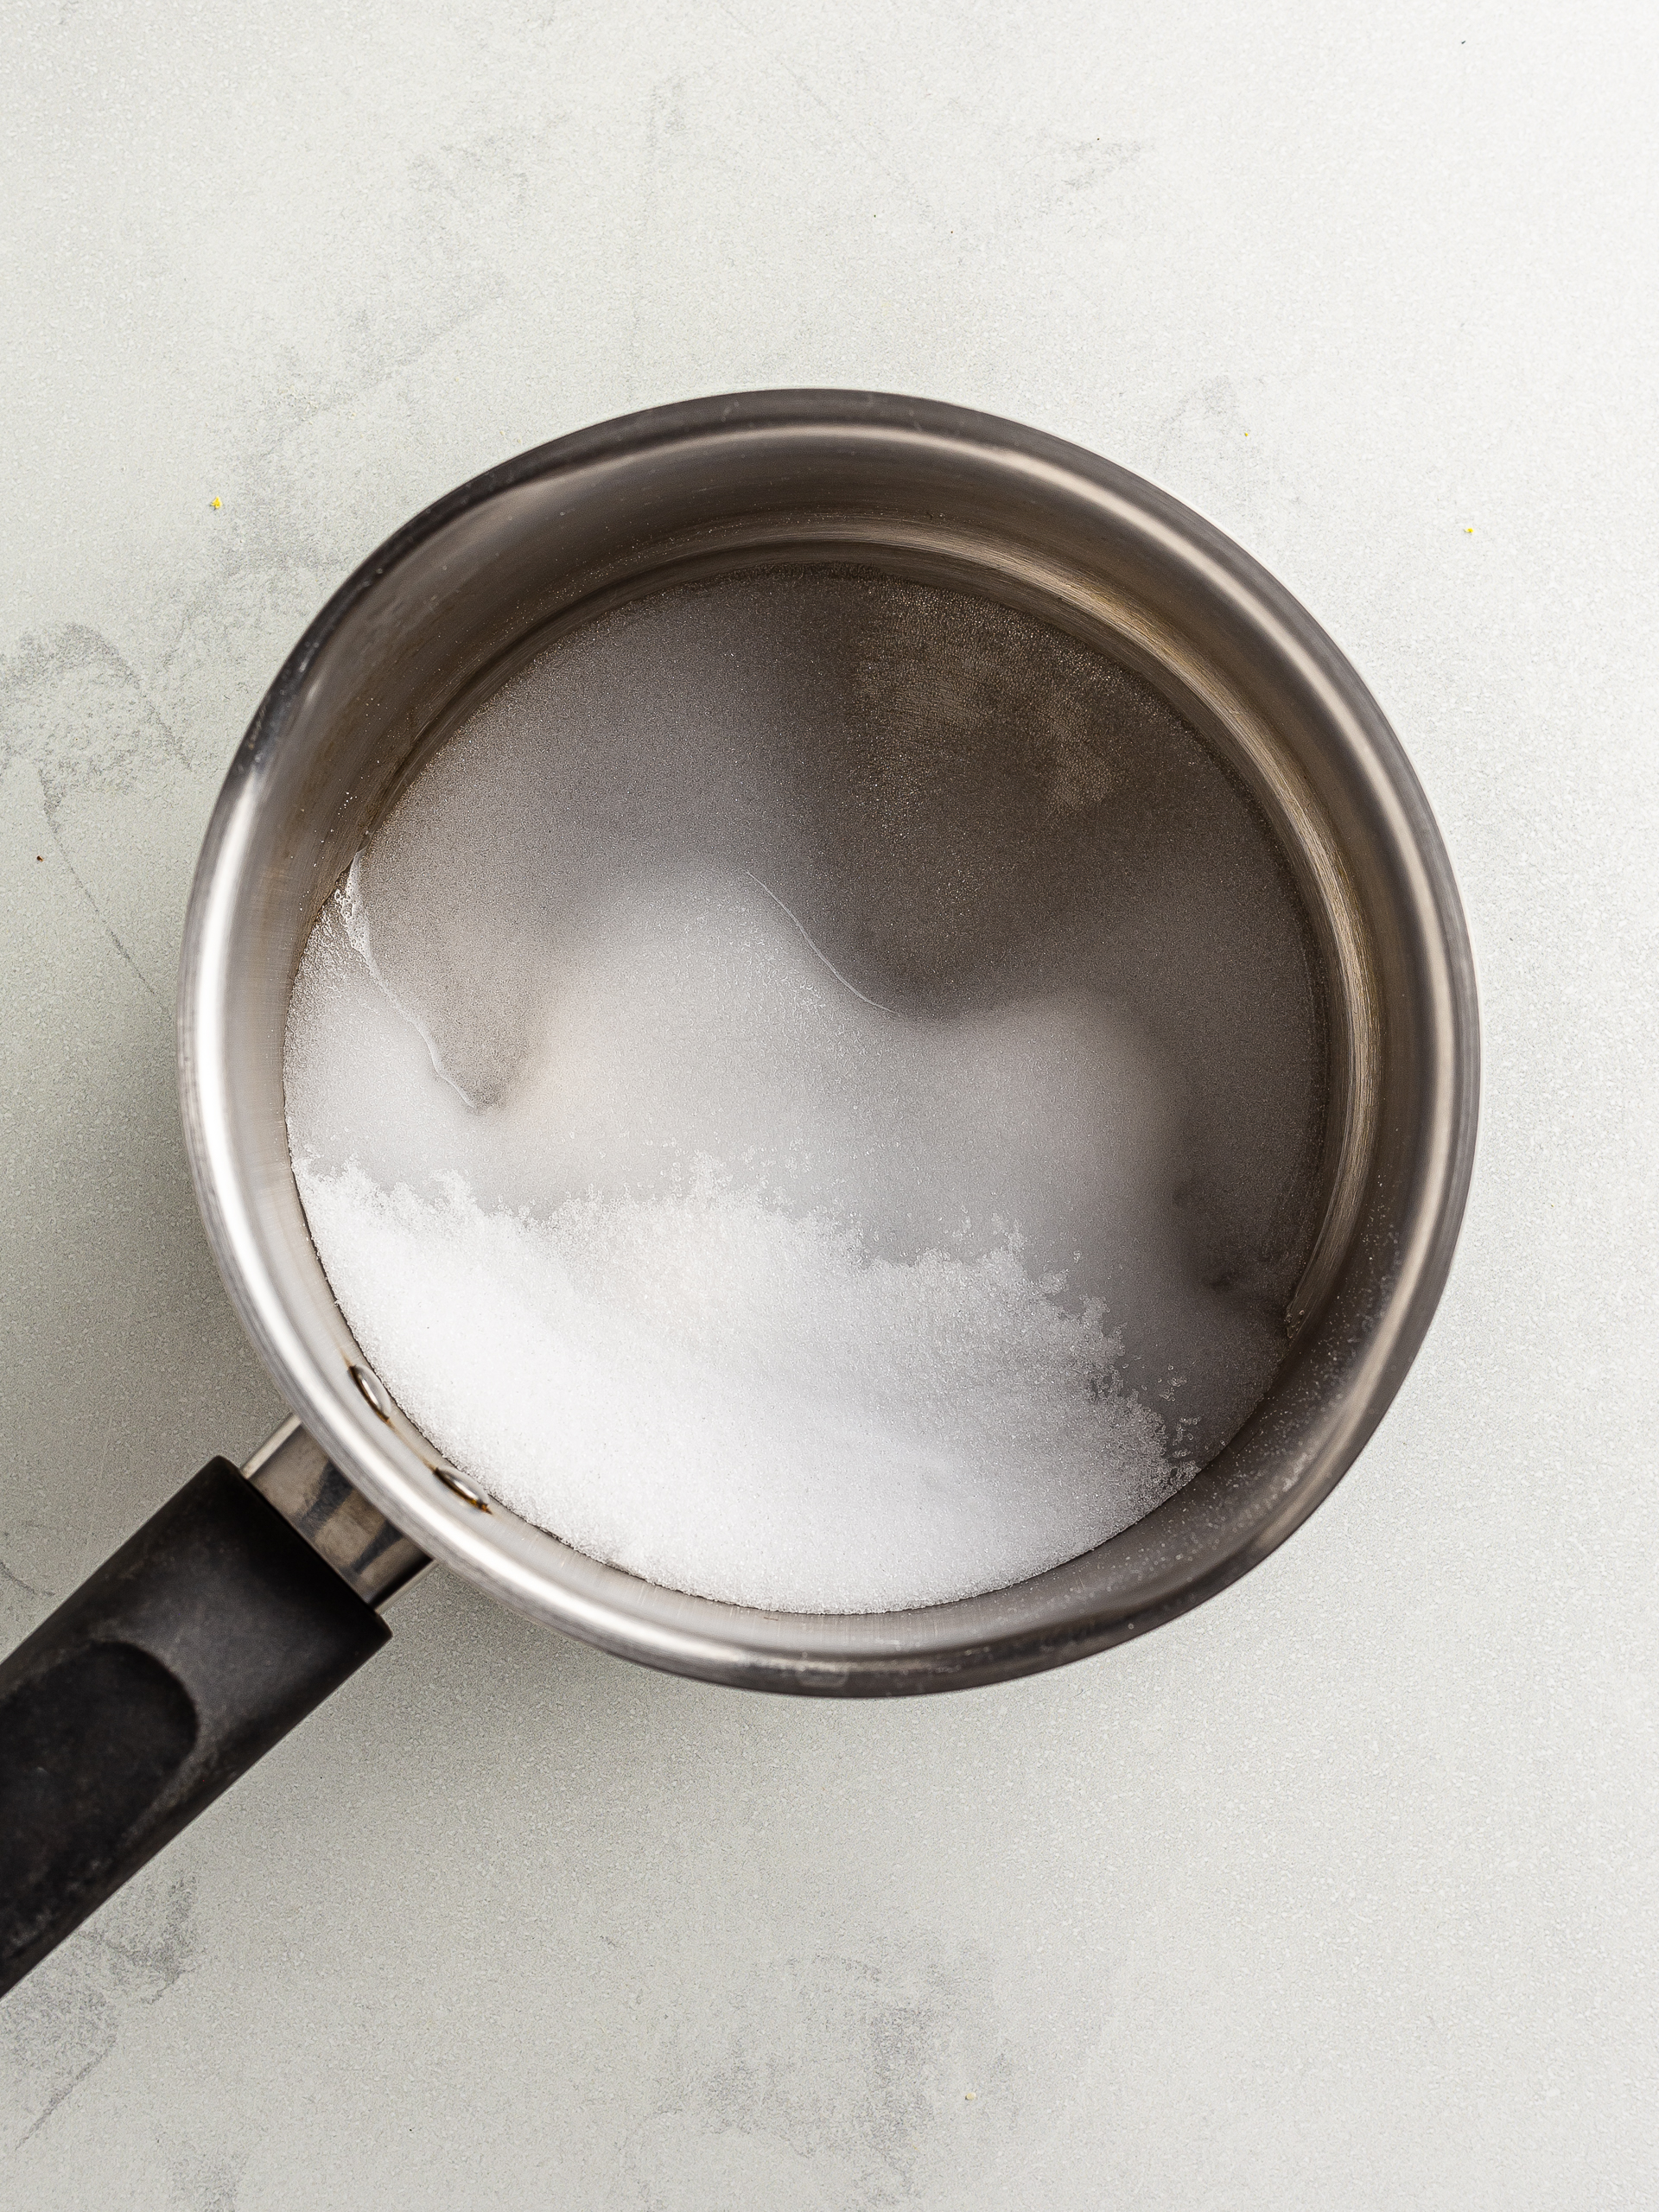 erythritol and water in a pot